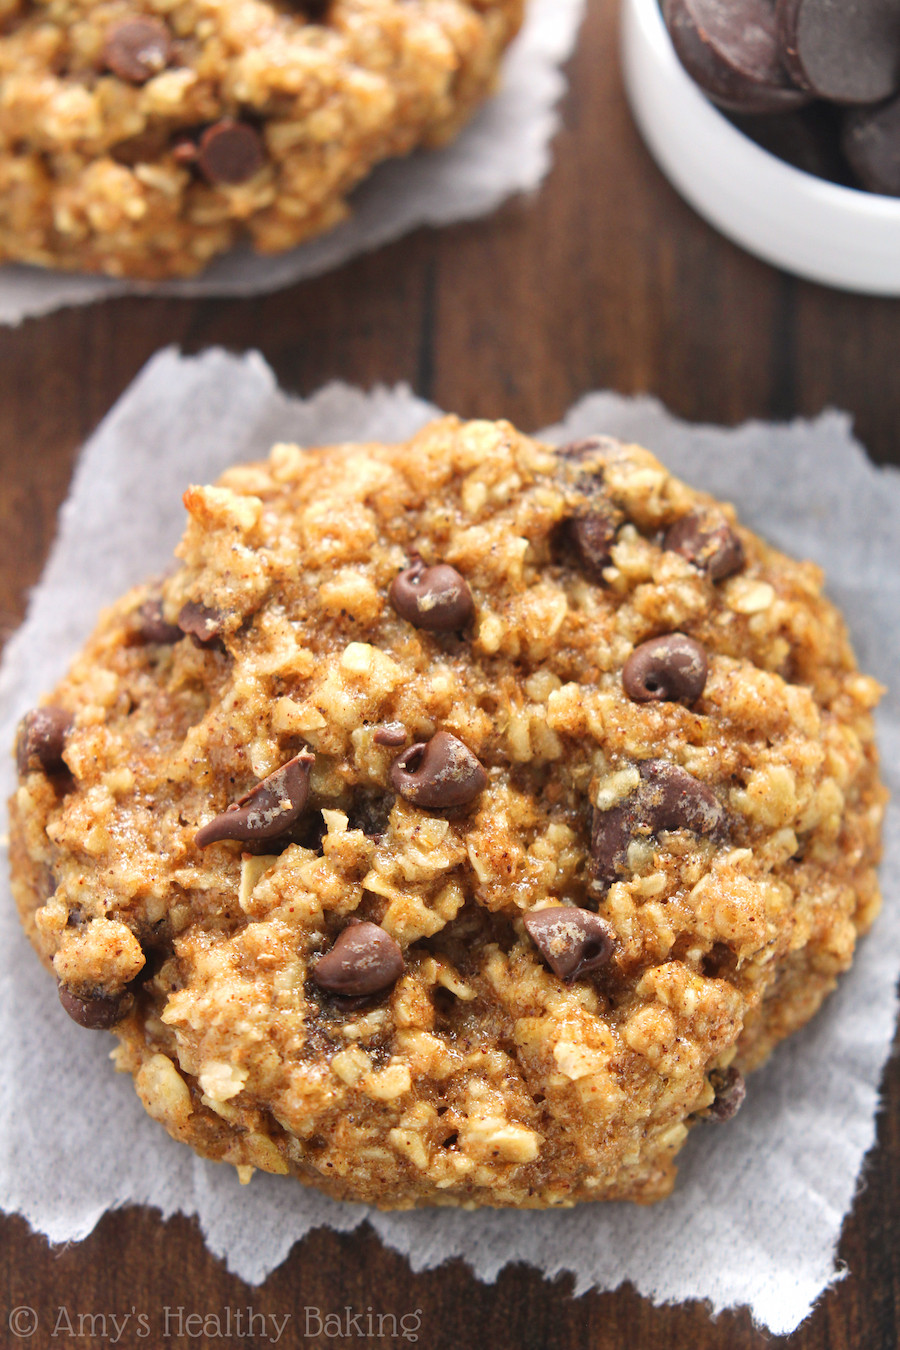 Chocolate Chip Oatmeal Cookies Healthy
 Chocolate Chip Banana Bread Oatmeal Cookies